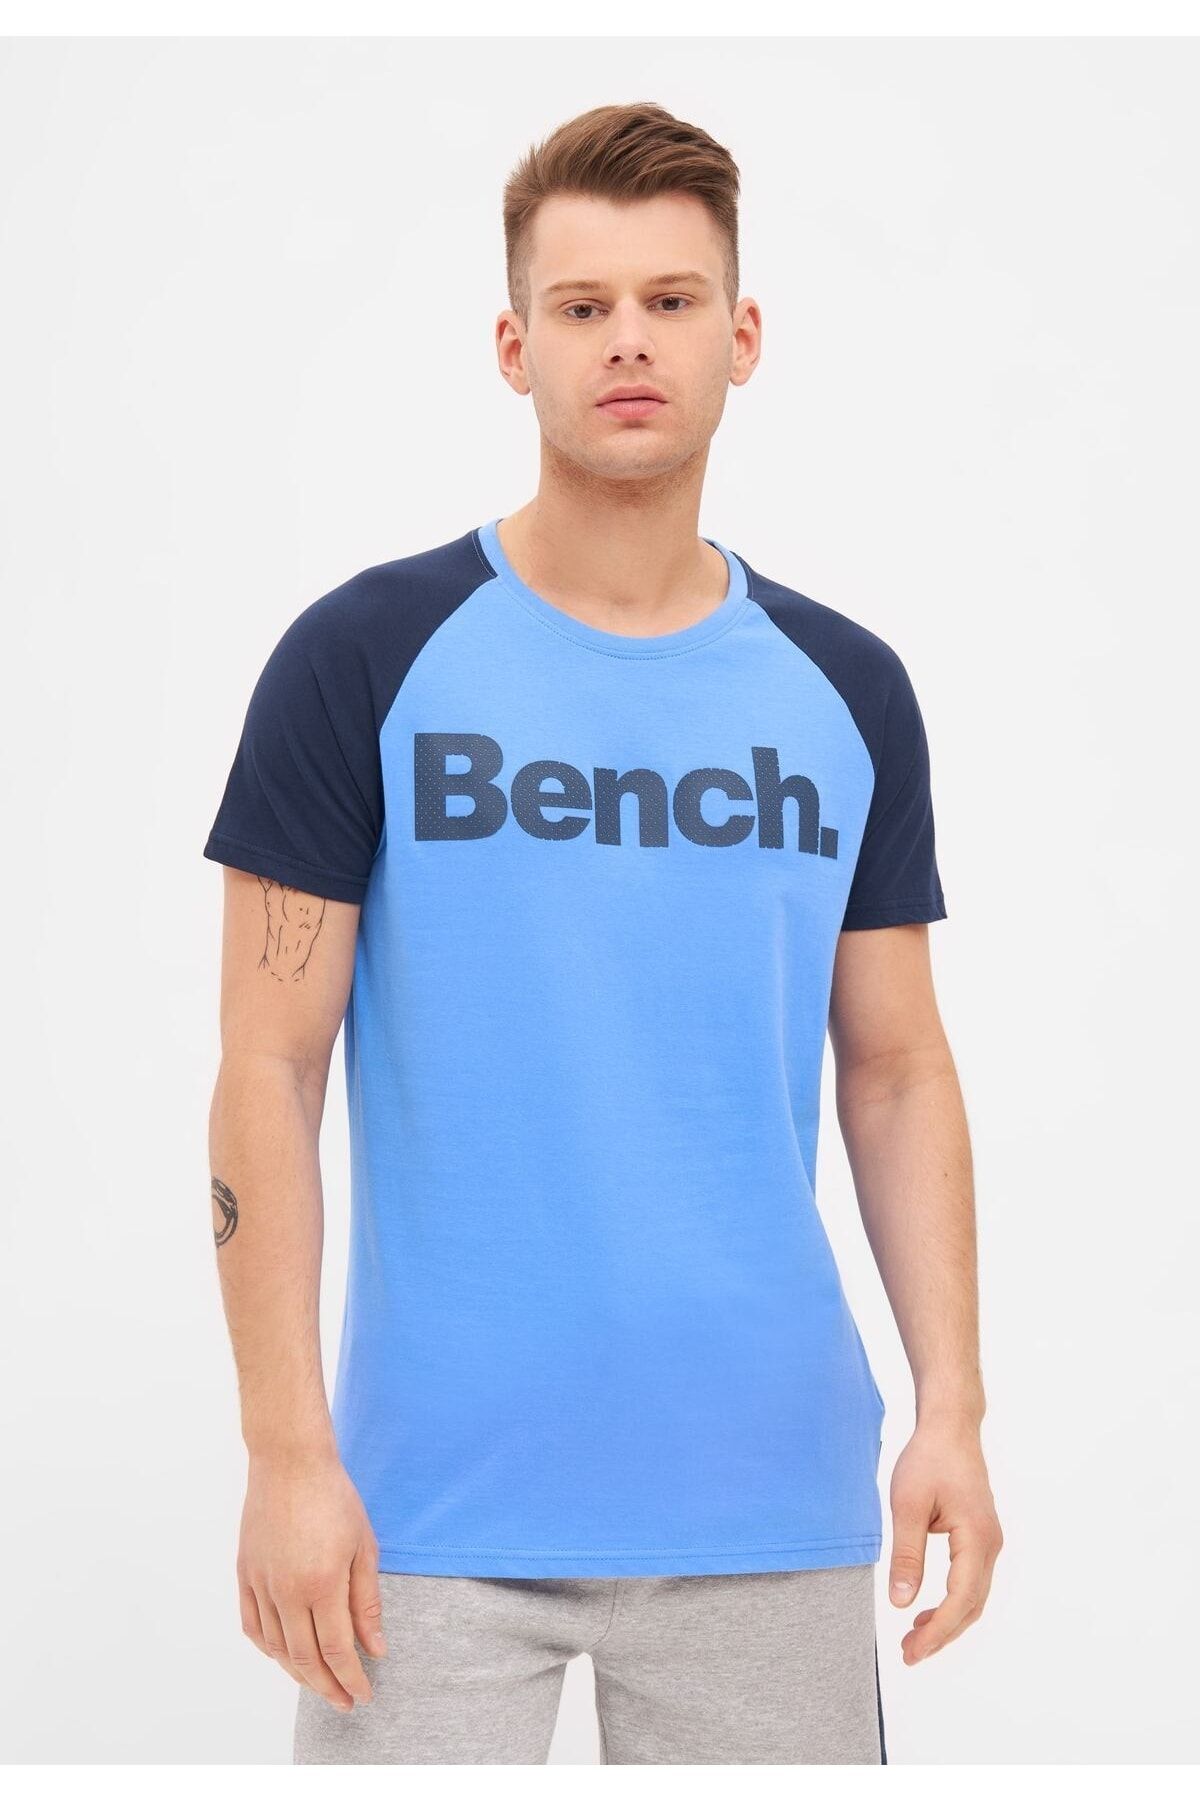 BENCH T-Shirt - Blue - Fitted - Trendyol | T-Shirts